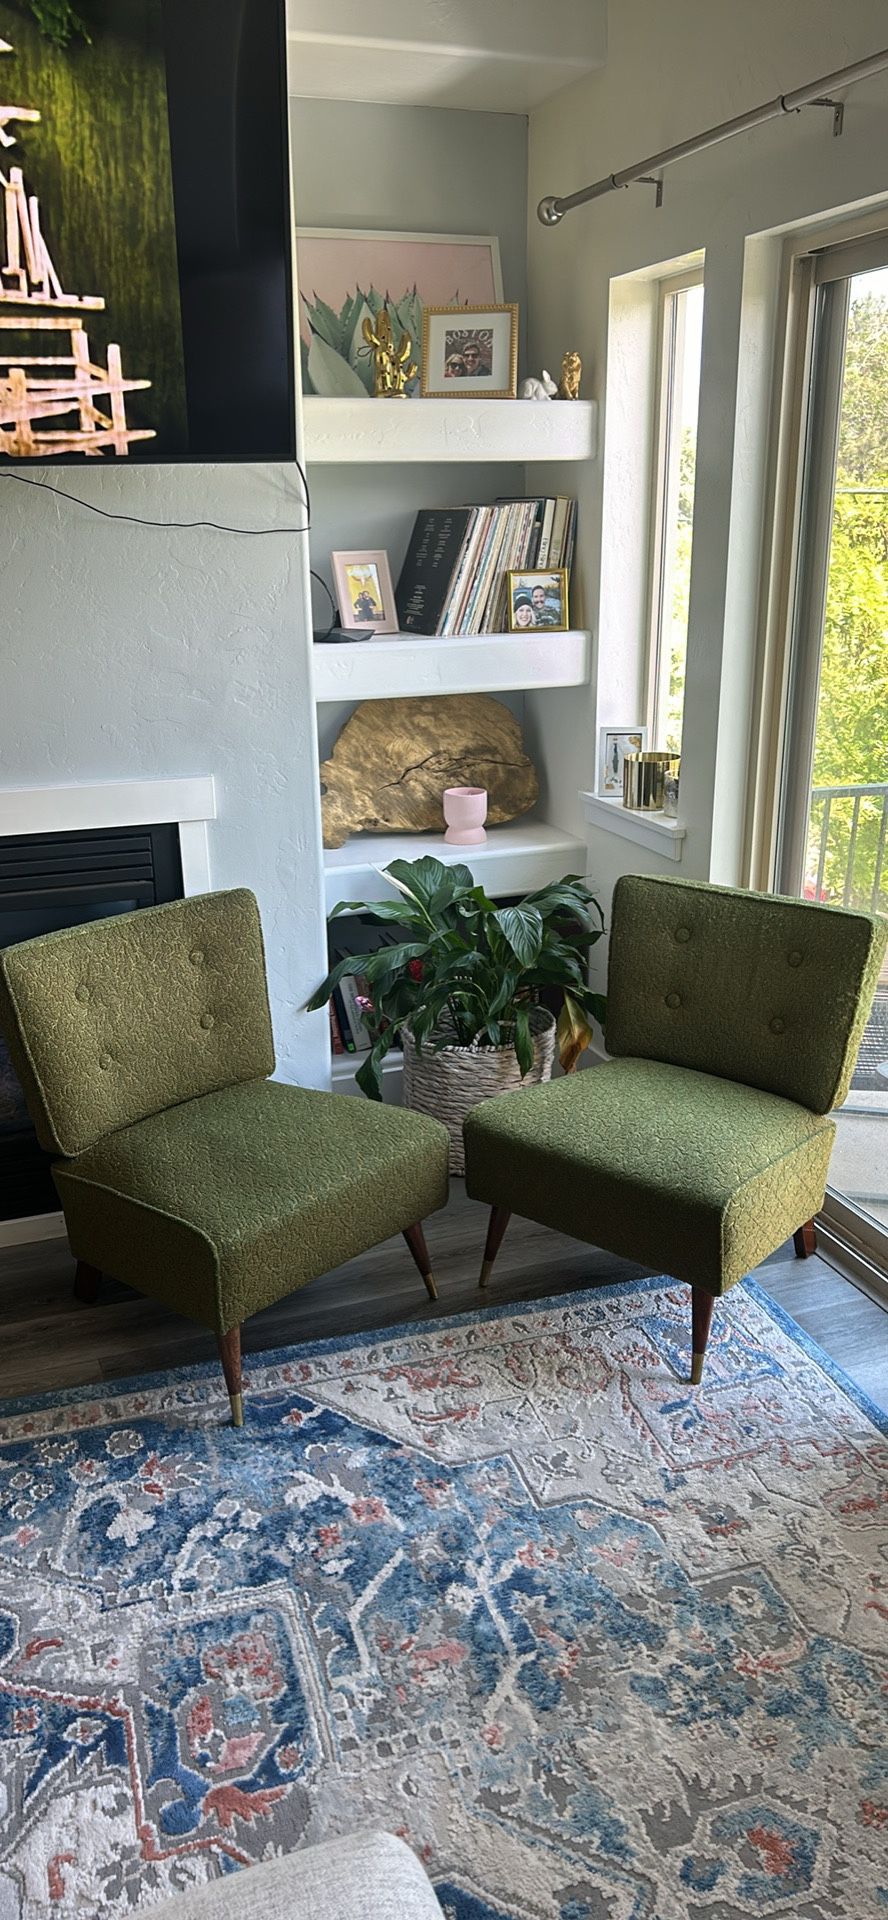 Mid Century Modern Chairs 1960’s Set Of 2 Green